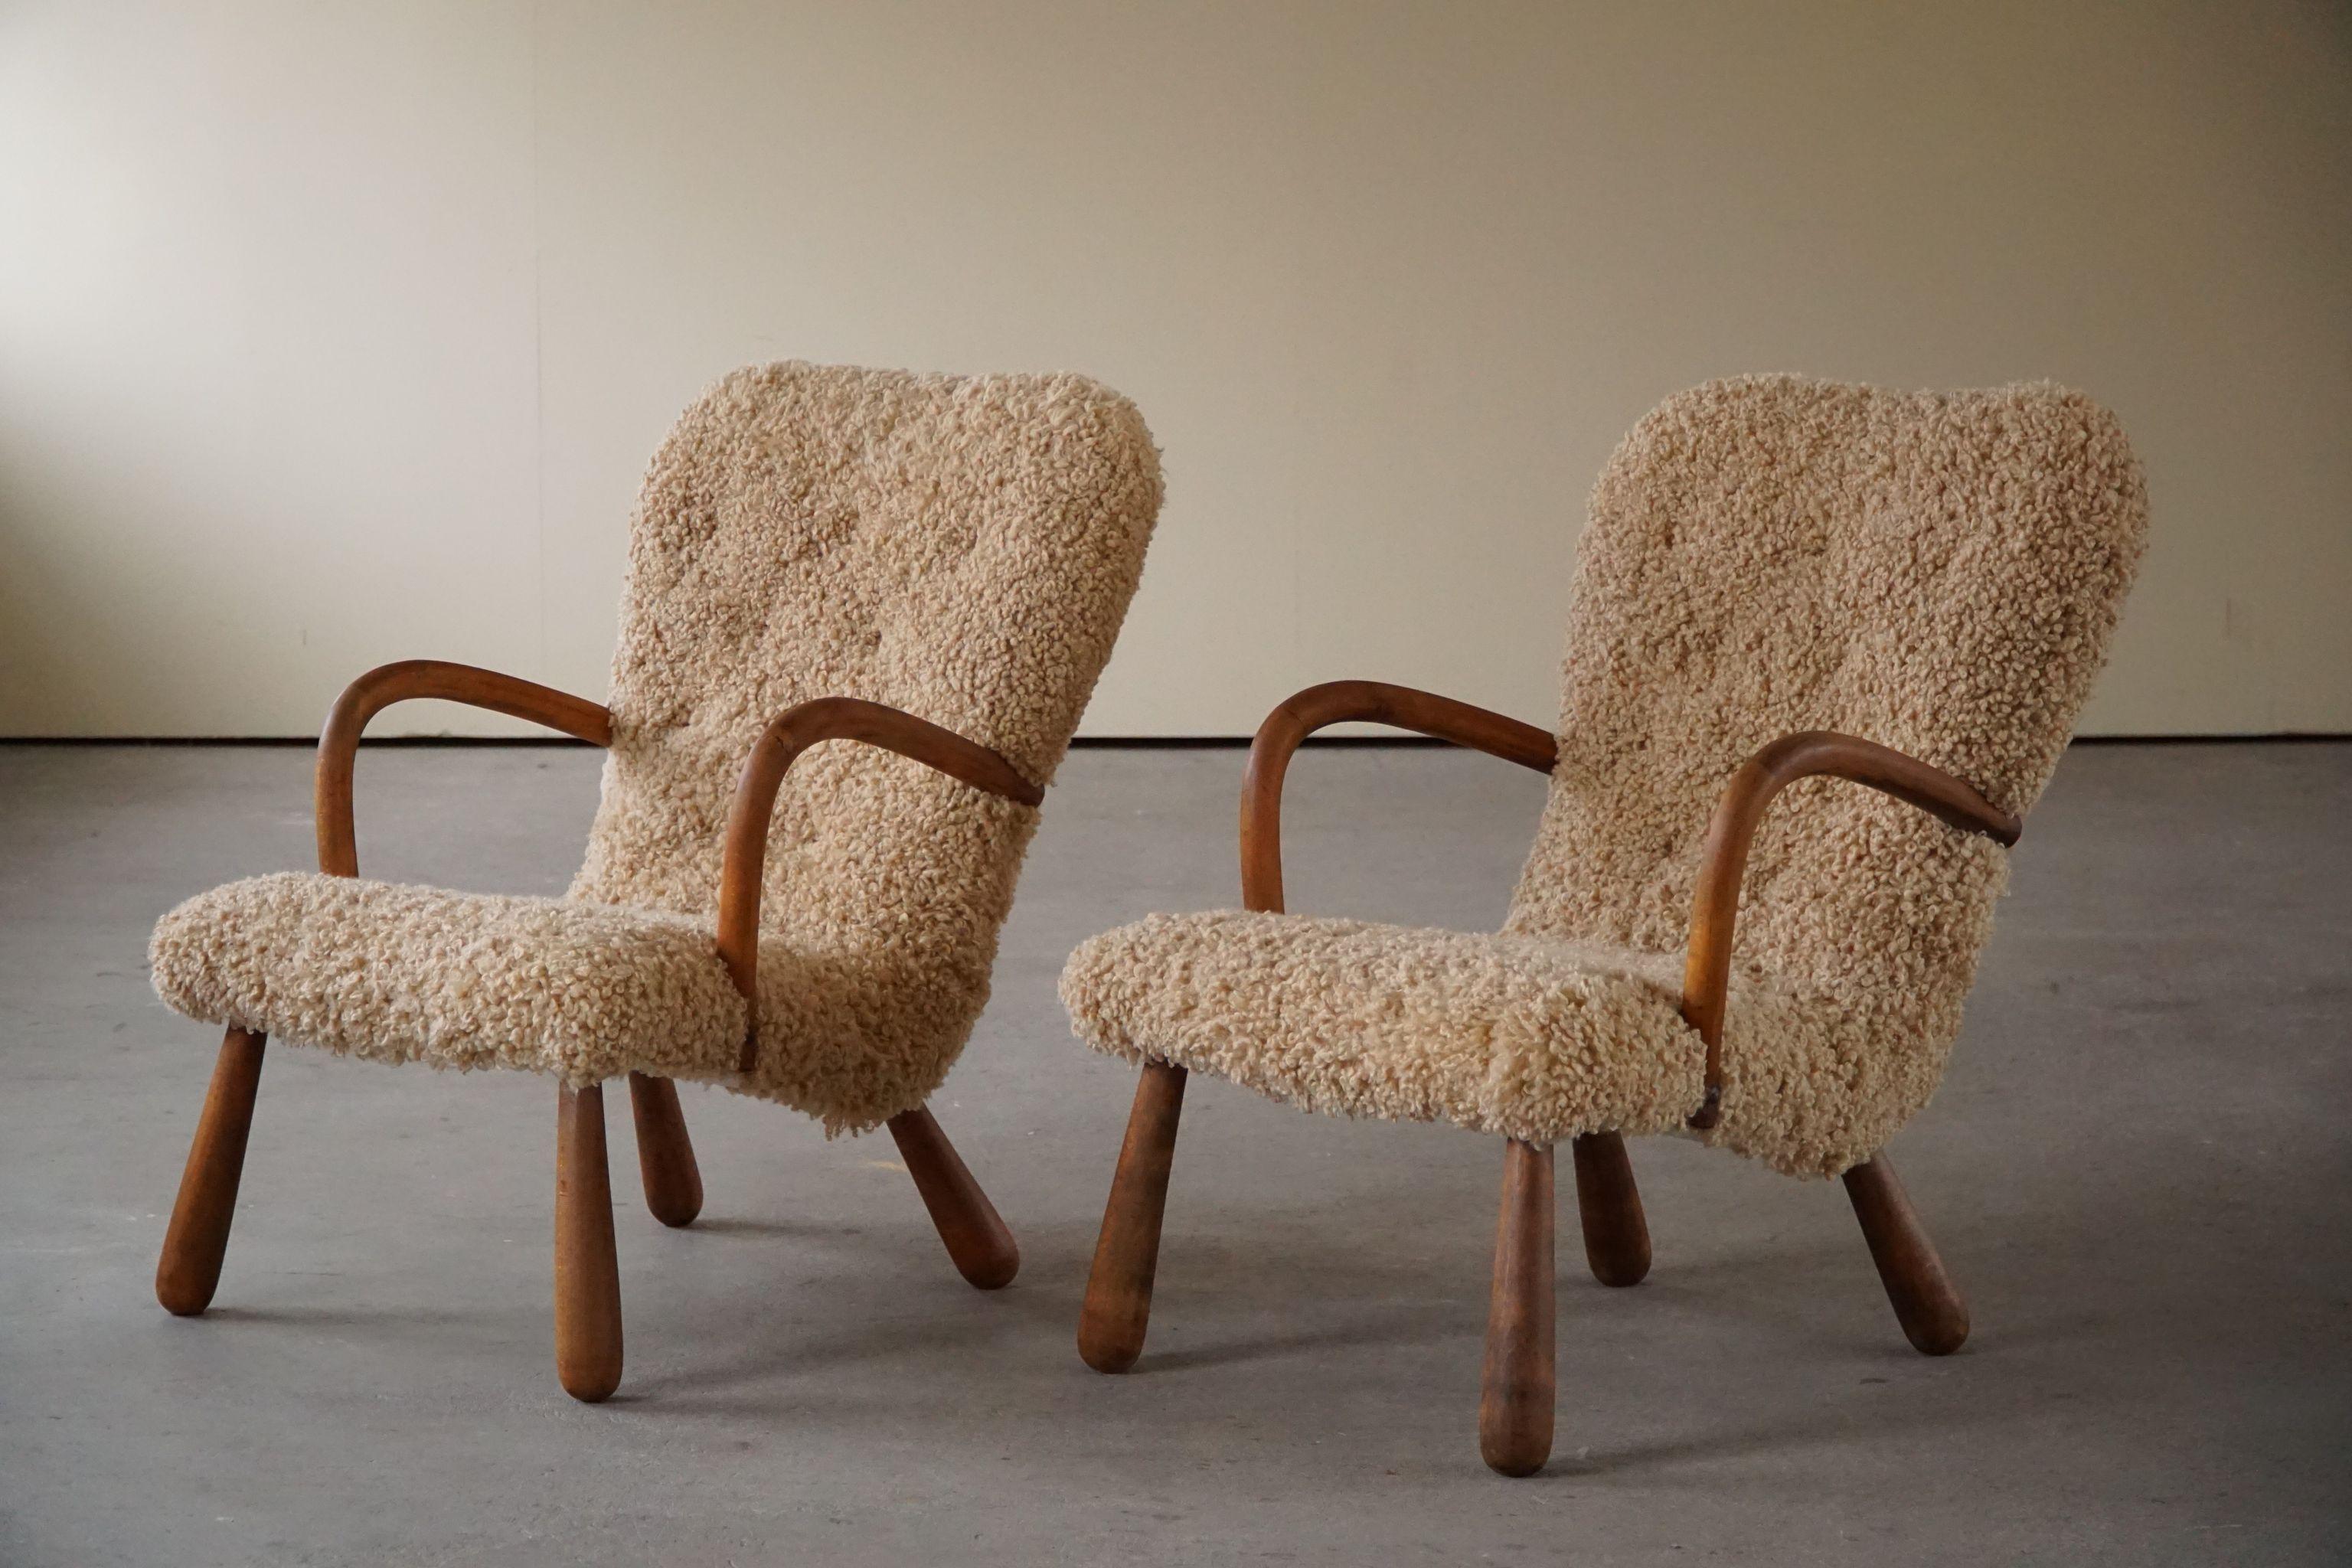 Pair of Clam Lounge Chairs in Lambswool, Skive Møbelfabrik, Denmark, 1950s For Sale 11